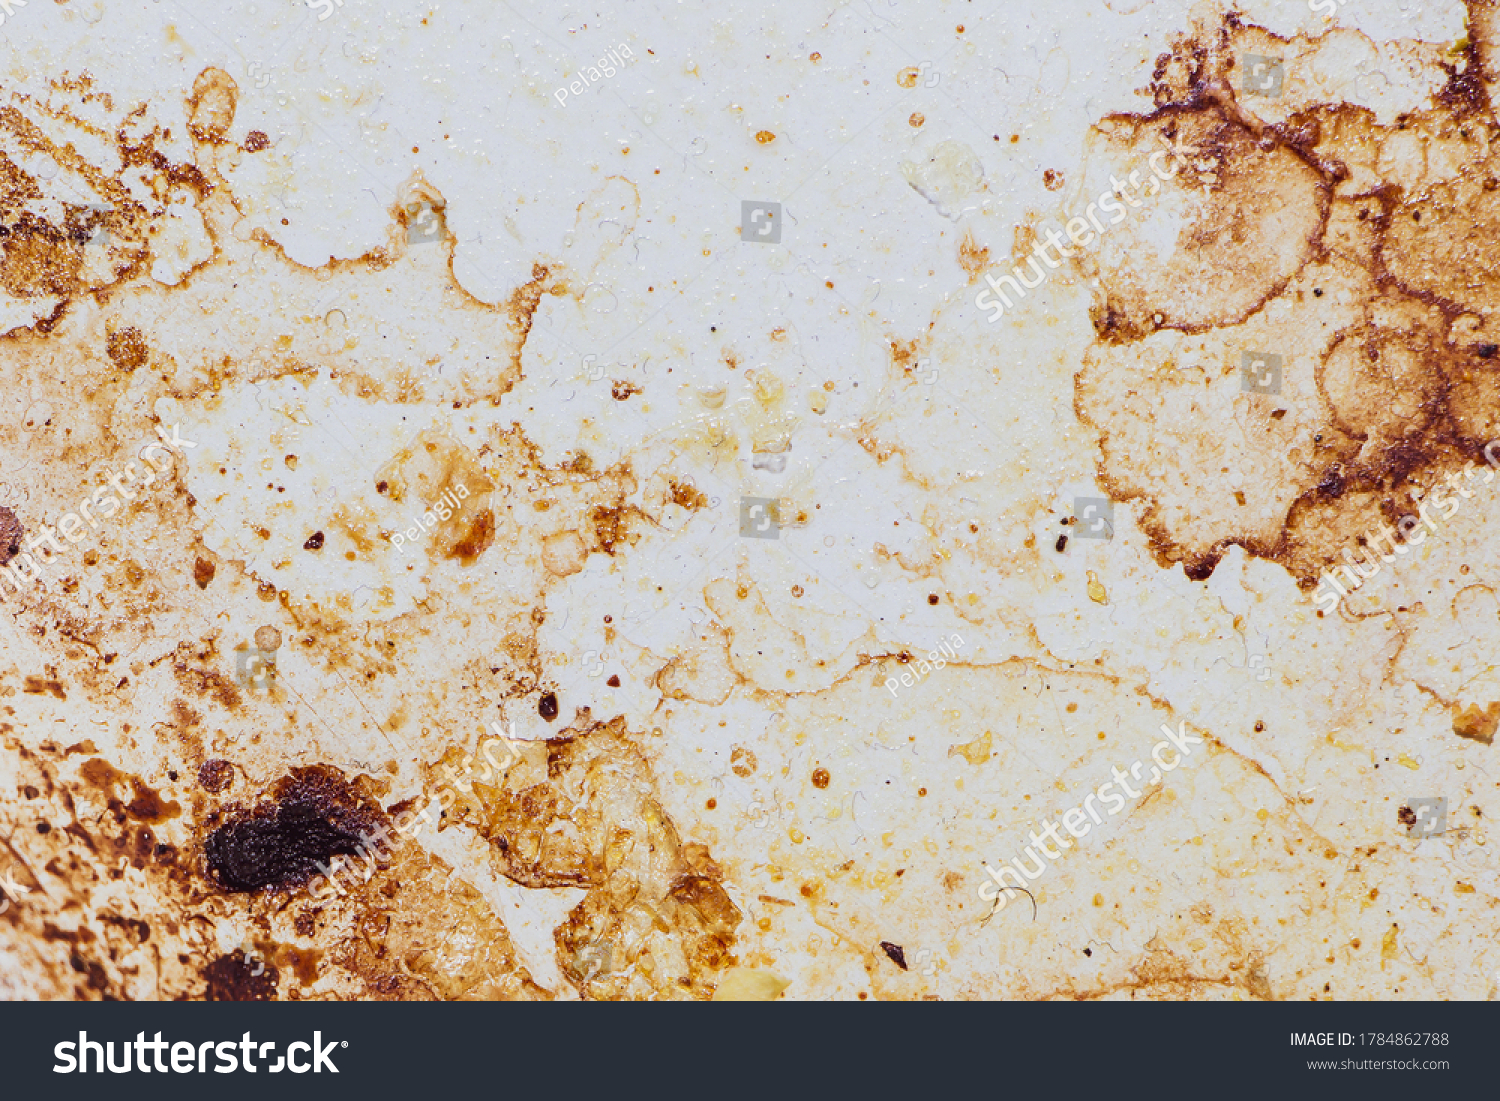 Texture of dirty stains and grease on white stove. Spots of fat on a white background #1784862788